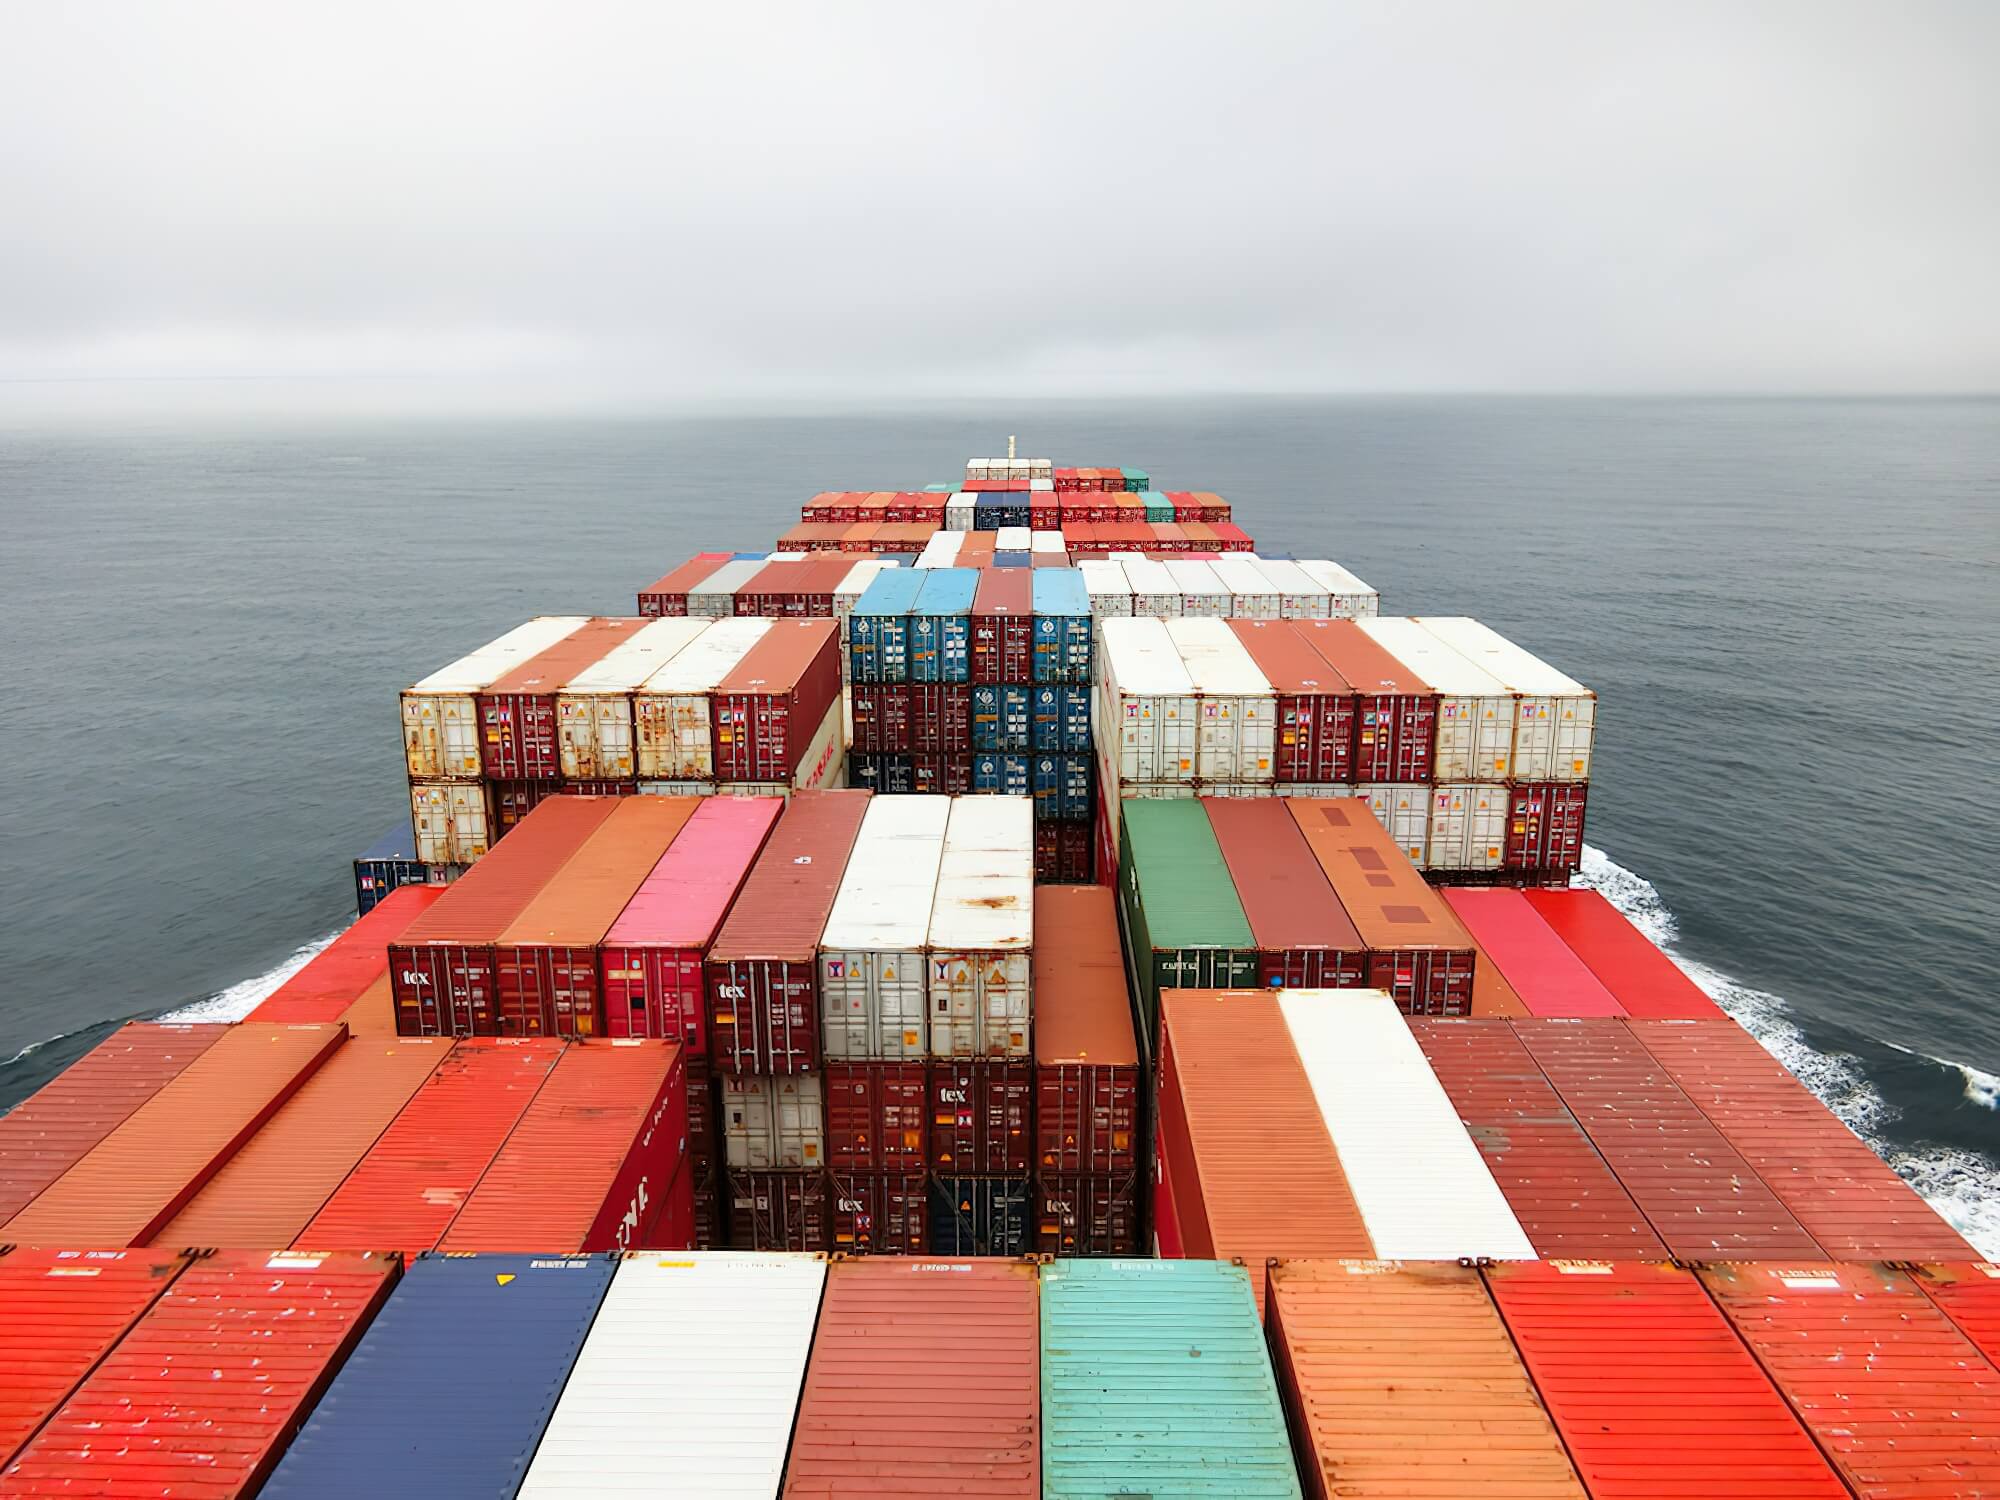 News Roundup: How Gulf Coast Ports Are Navigating Container Imports Downturn, Emissions Reduction Talk At Athens Summit, & More